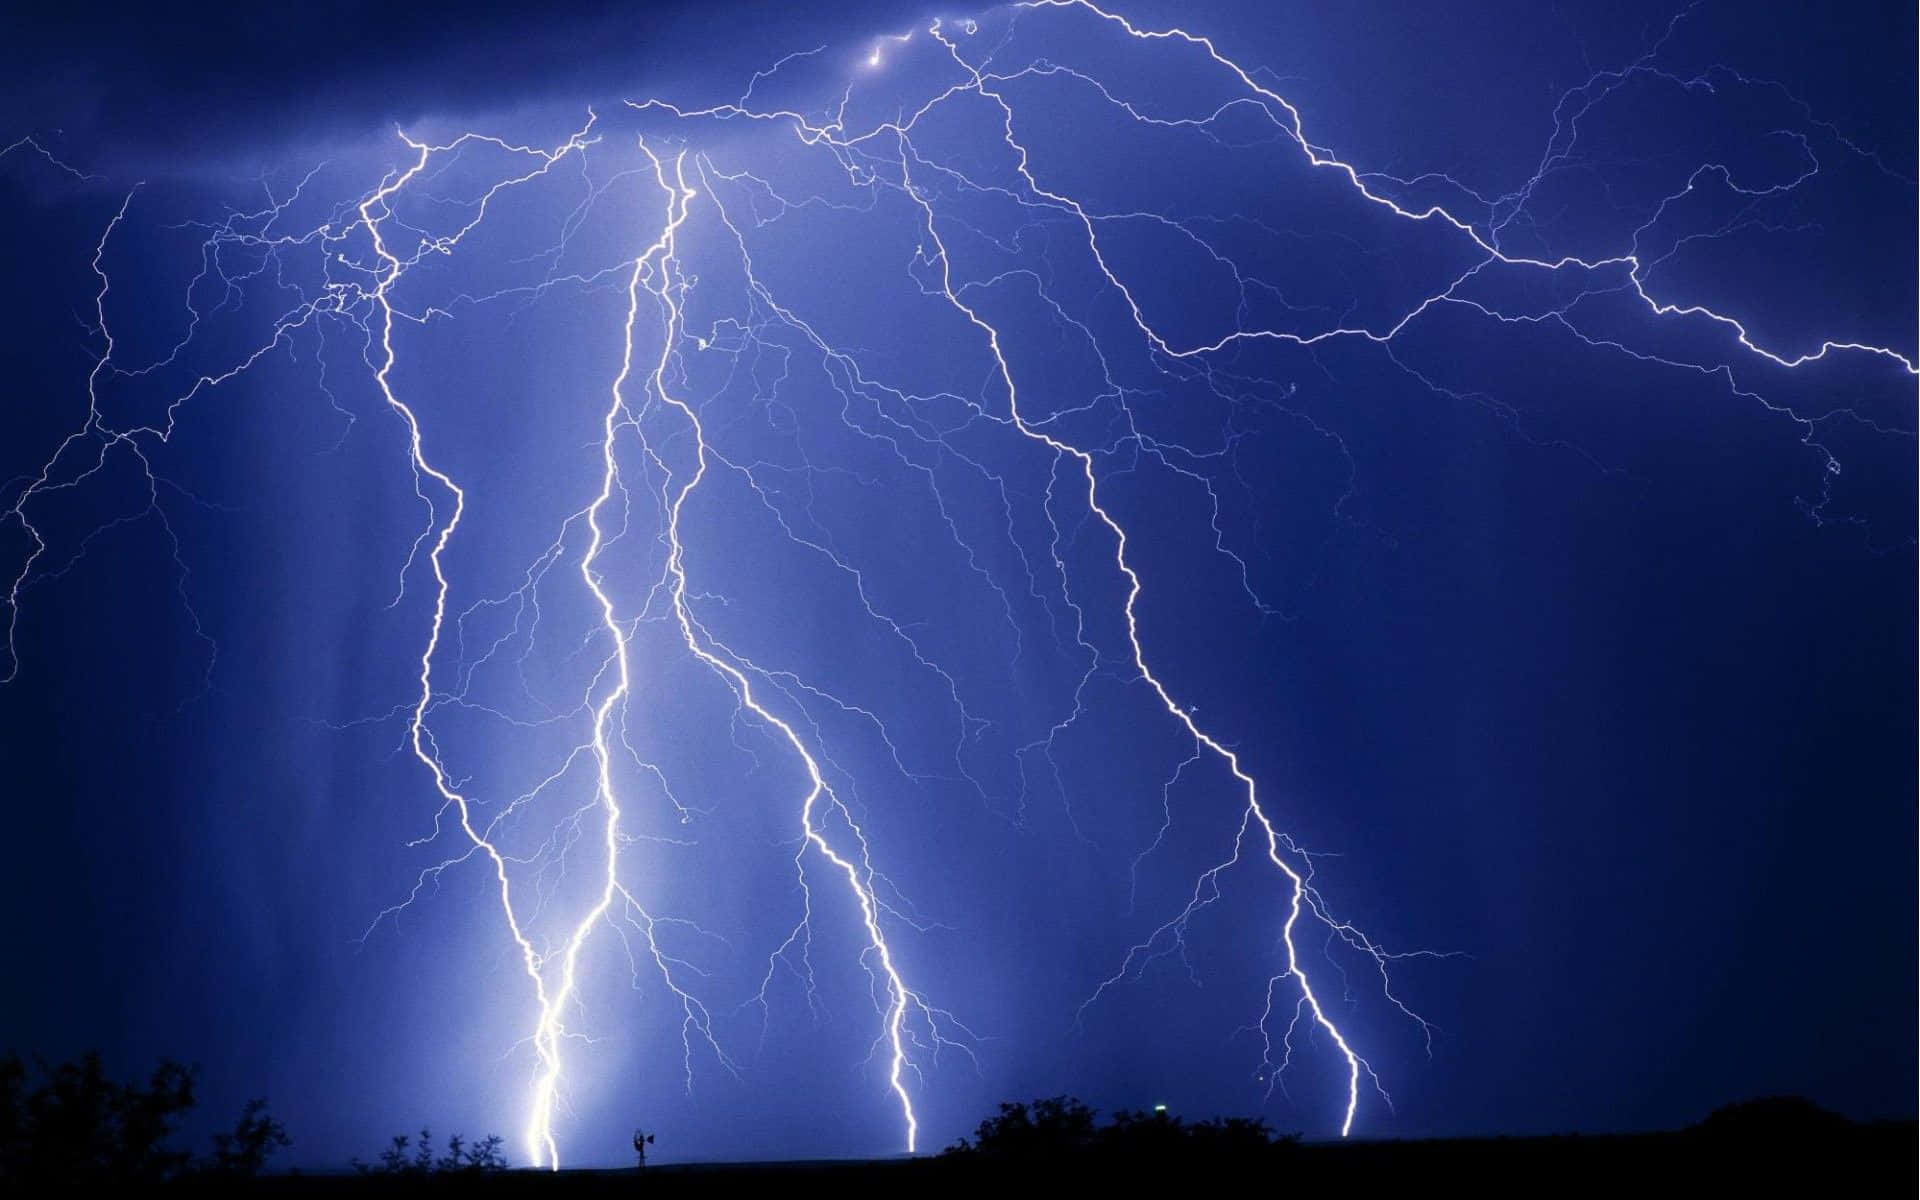 An Intense Thunderstorm With Brilliant Blue Lightning. Background